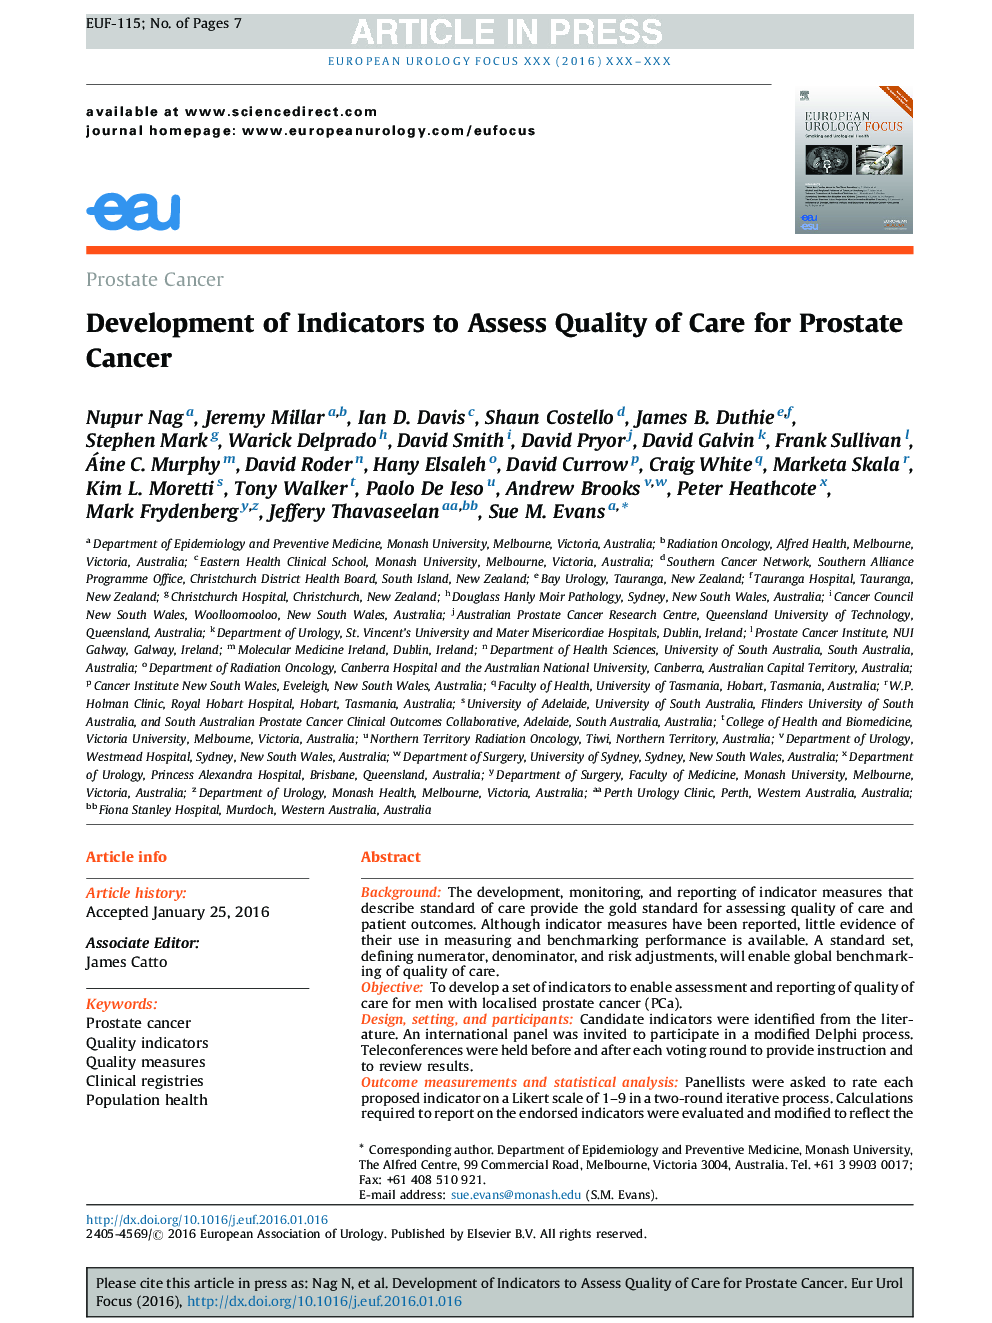 Development of Indicators to Assess Quality of Care for Prostate Cancer